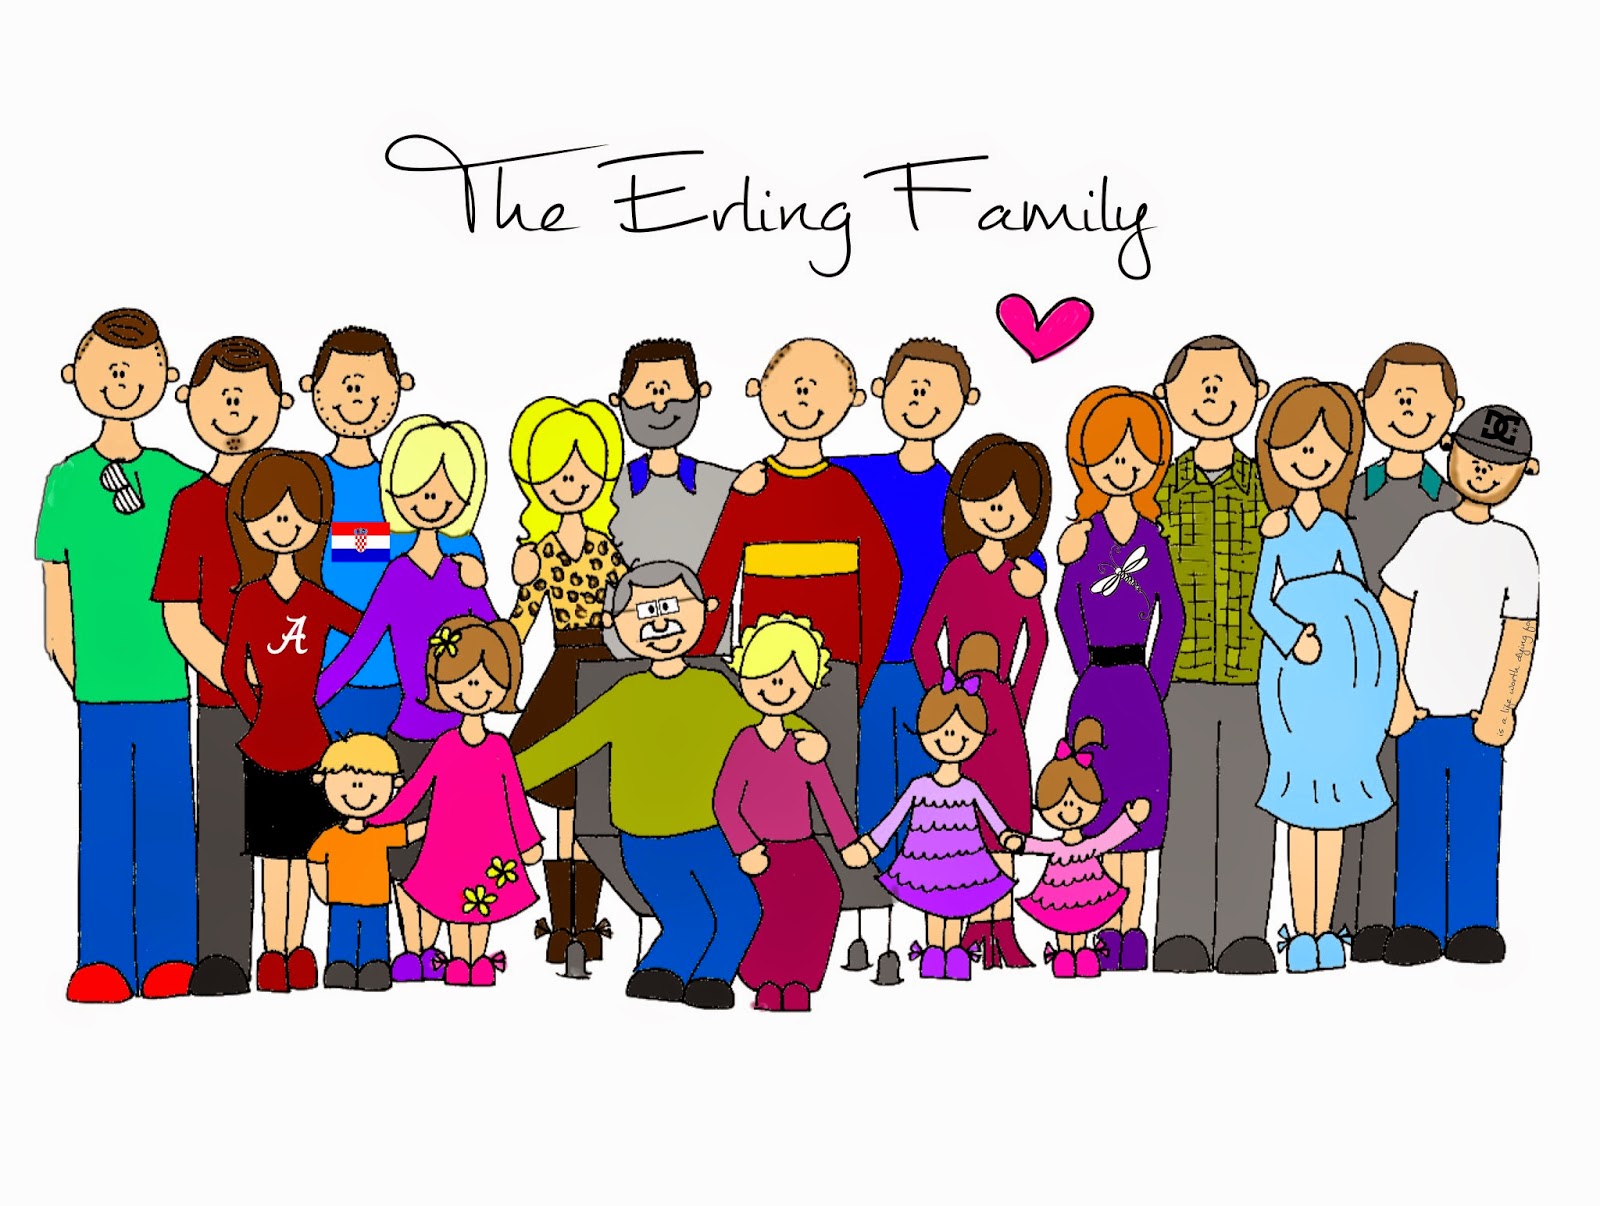 joint family clipart images - photo #39